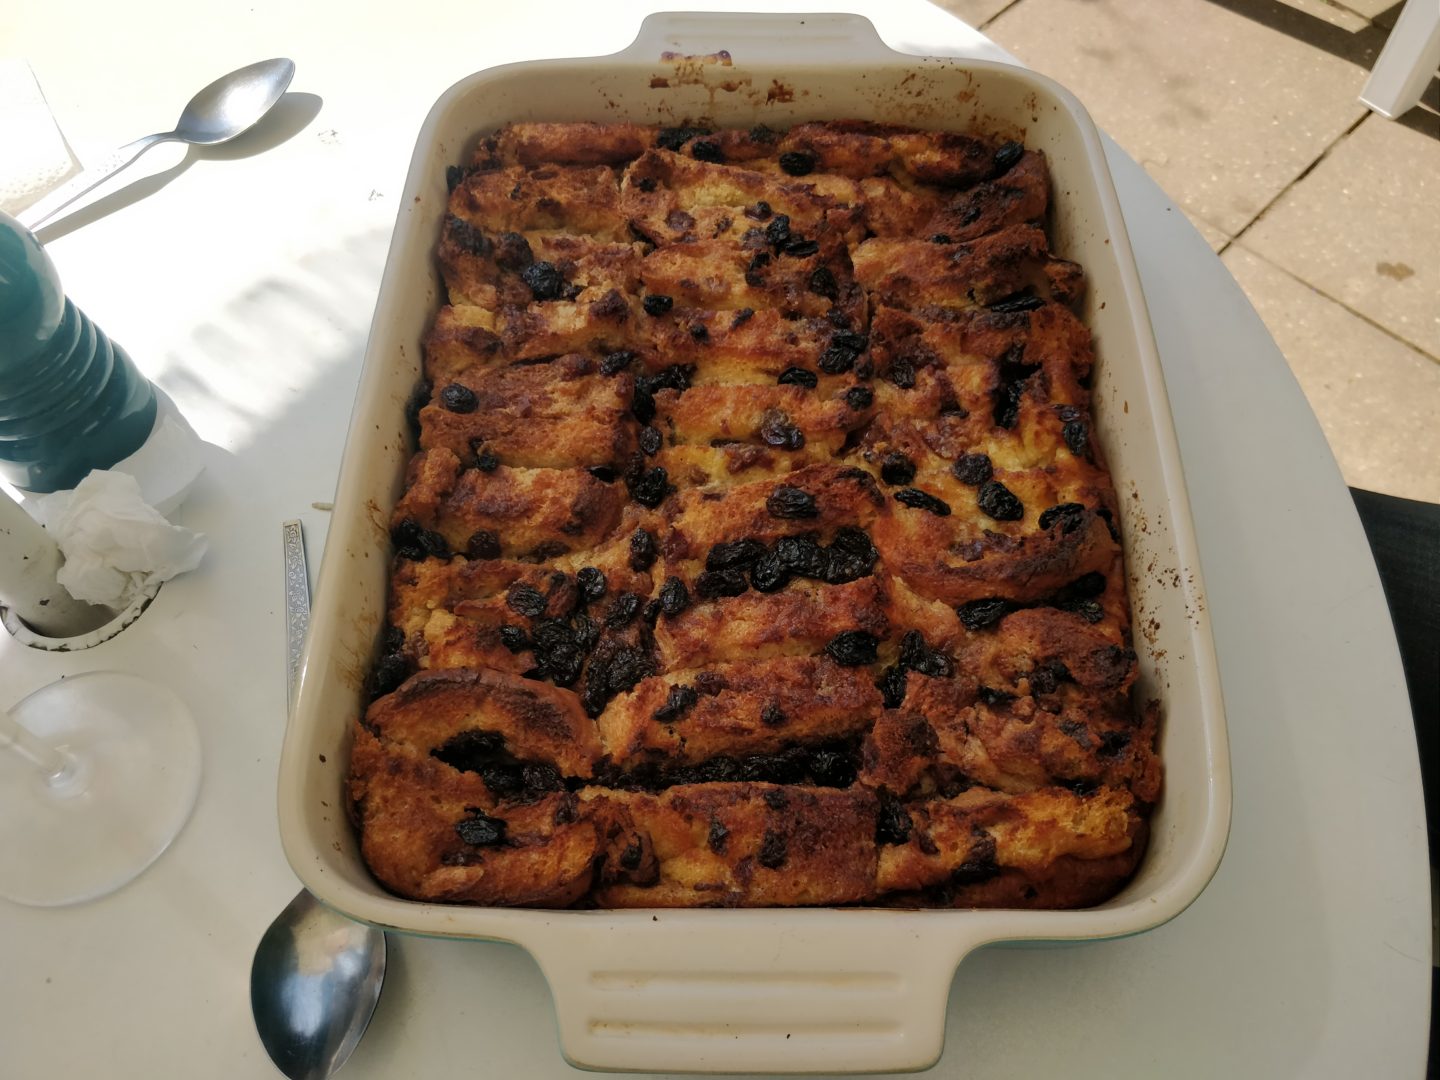 The finished Hot Cross Bun and Butter Pudding